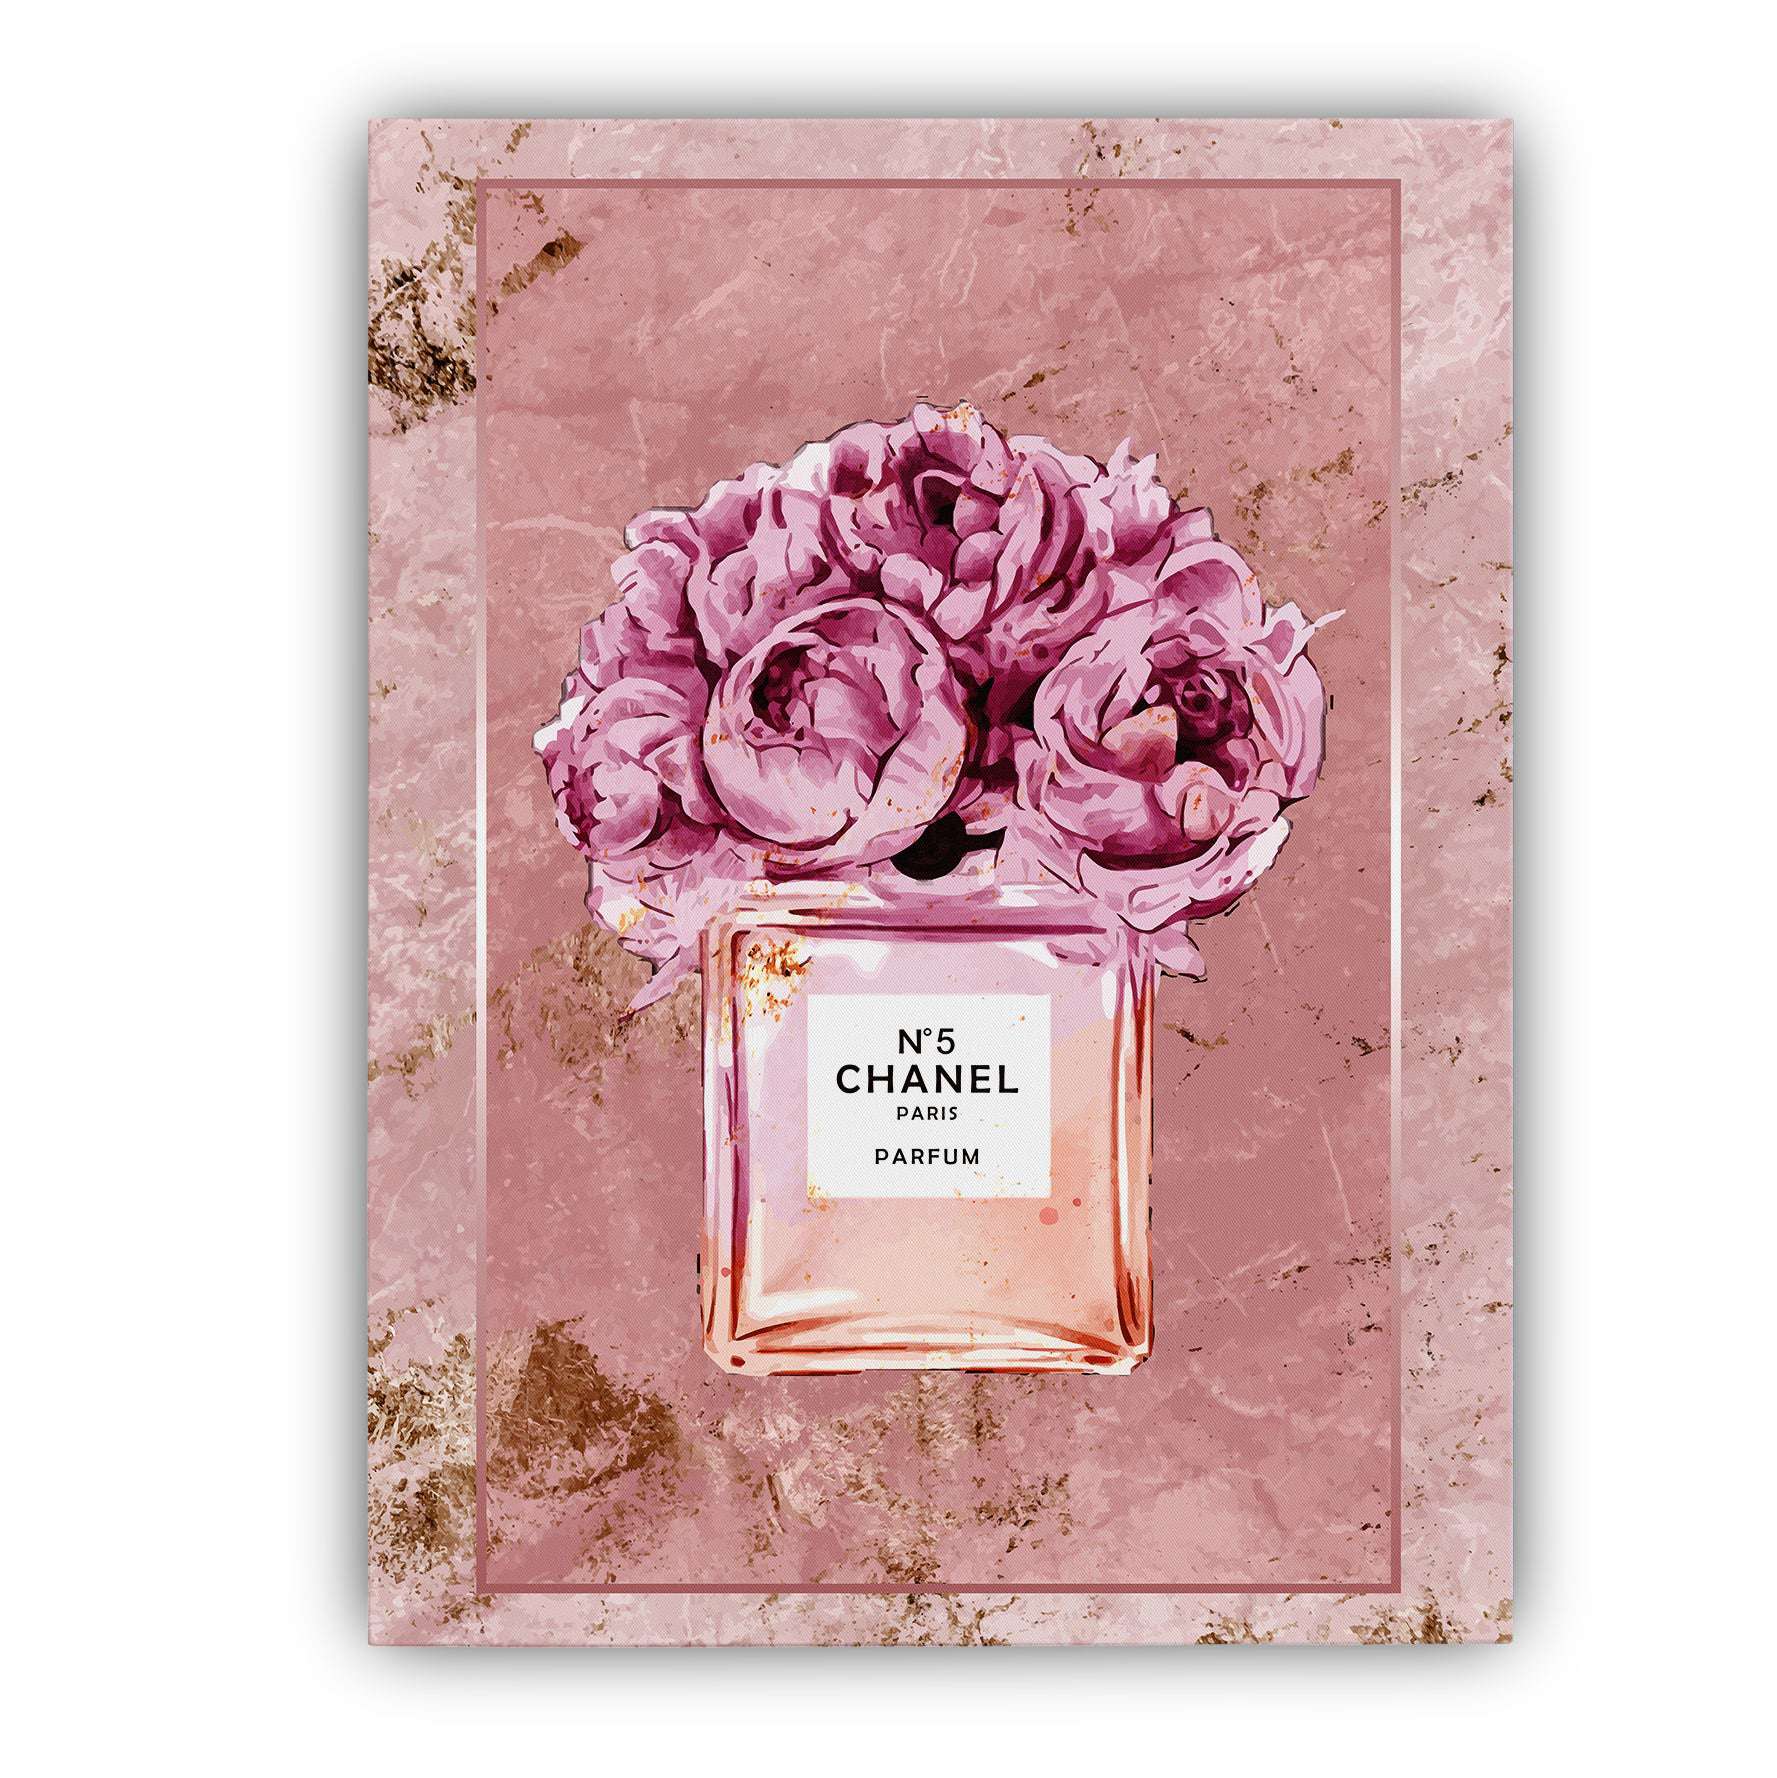 Pink Chanel Art: Canvas Prints, Frames & Posters